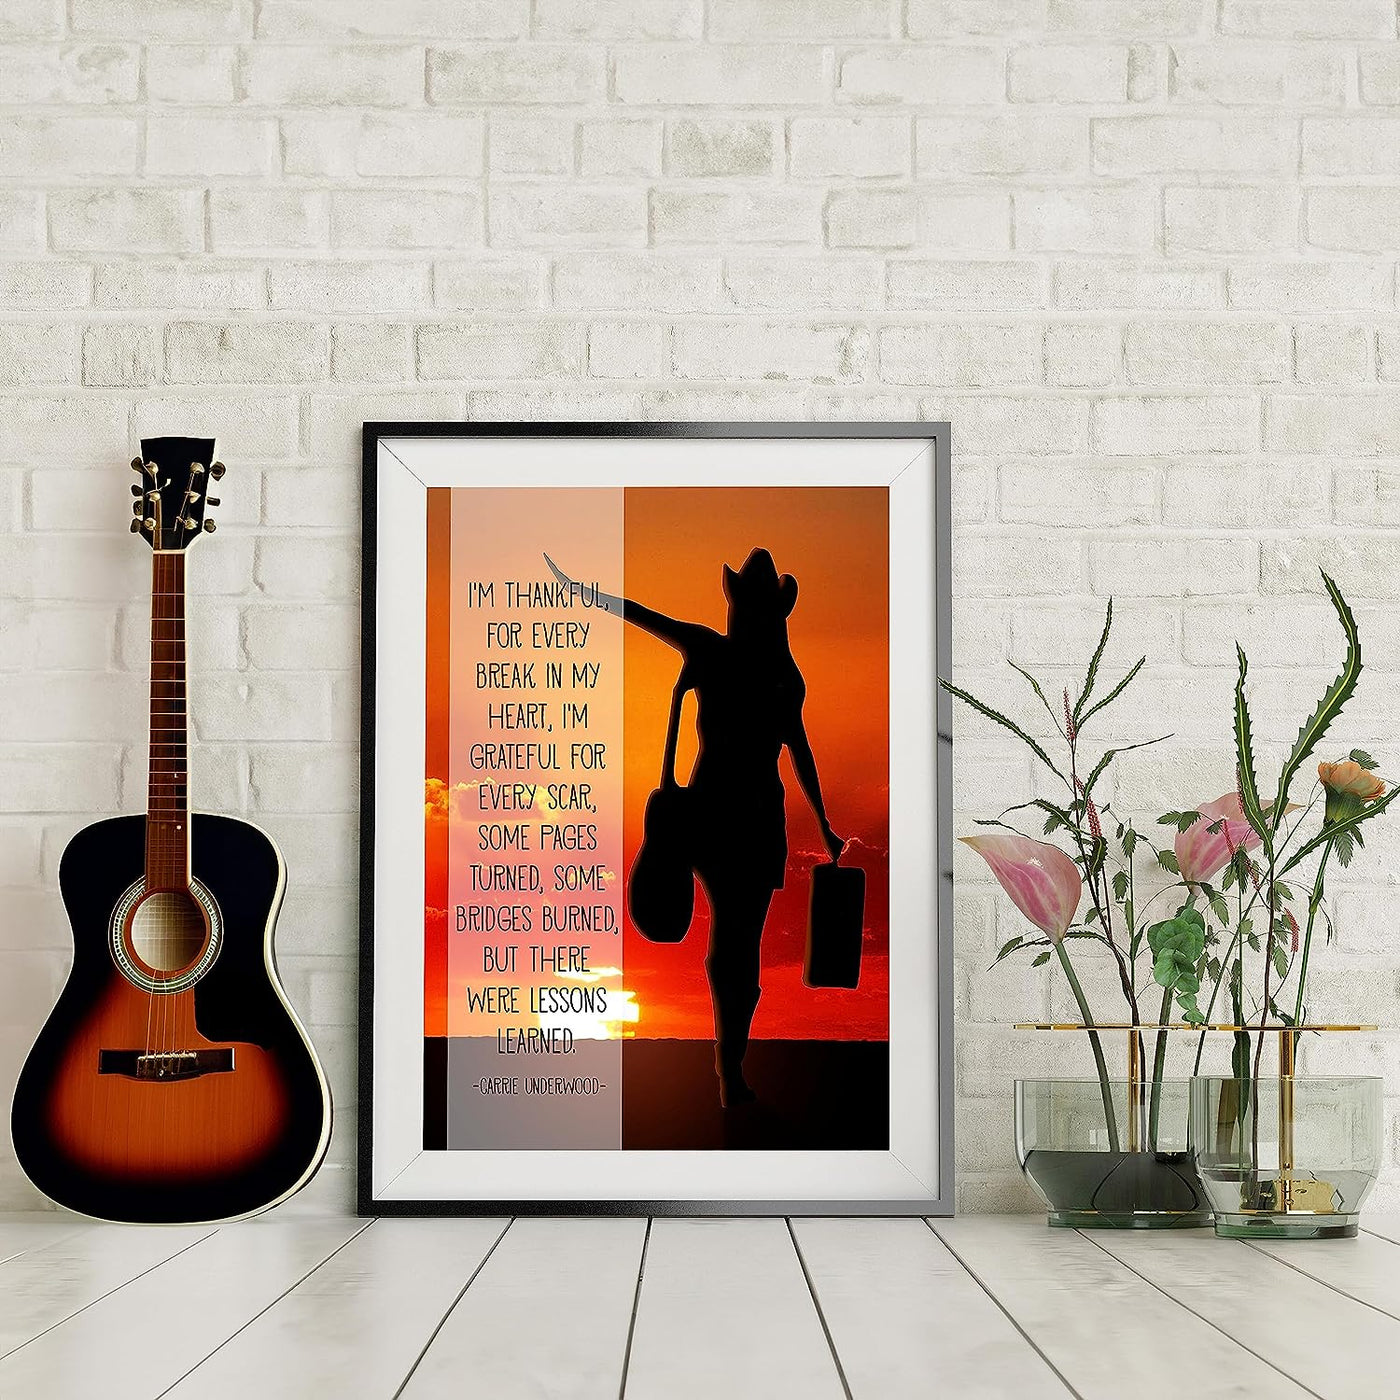 I'm Thankful for Every Break in My Heart-Inspirational Quotes Wall Art-11 x 14" Motivational Sunset Poster Print-Ready to Frame. Home-Office-Studio-Dorm Decor. Great Gift for Country Music Fans!